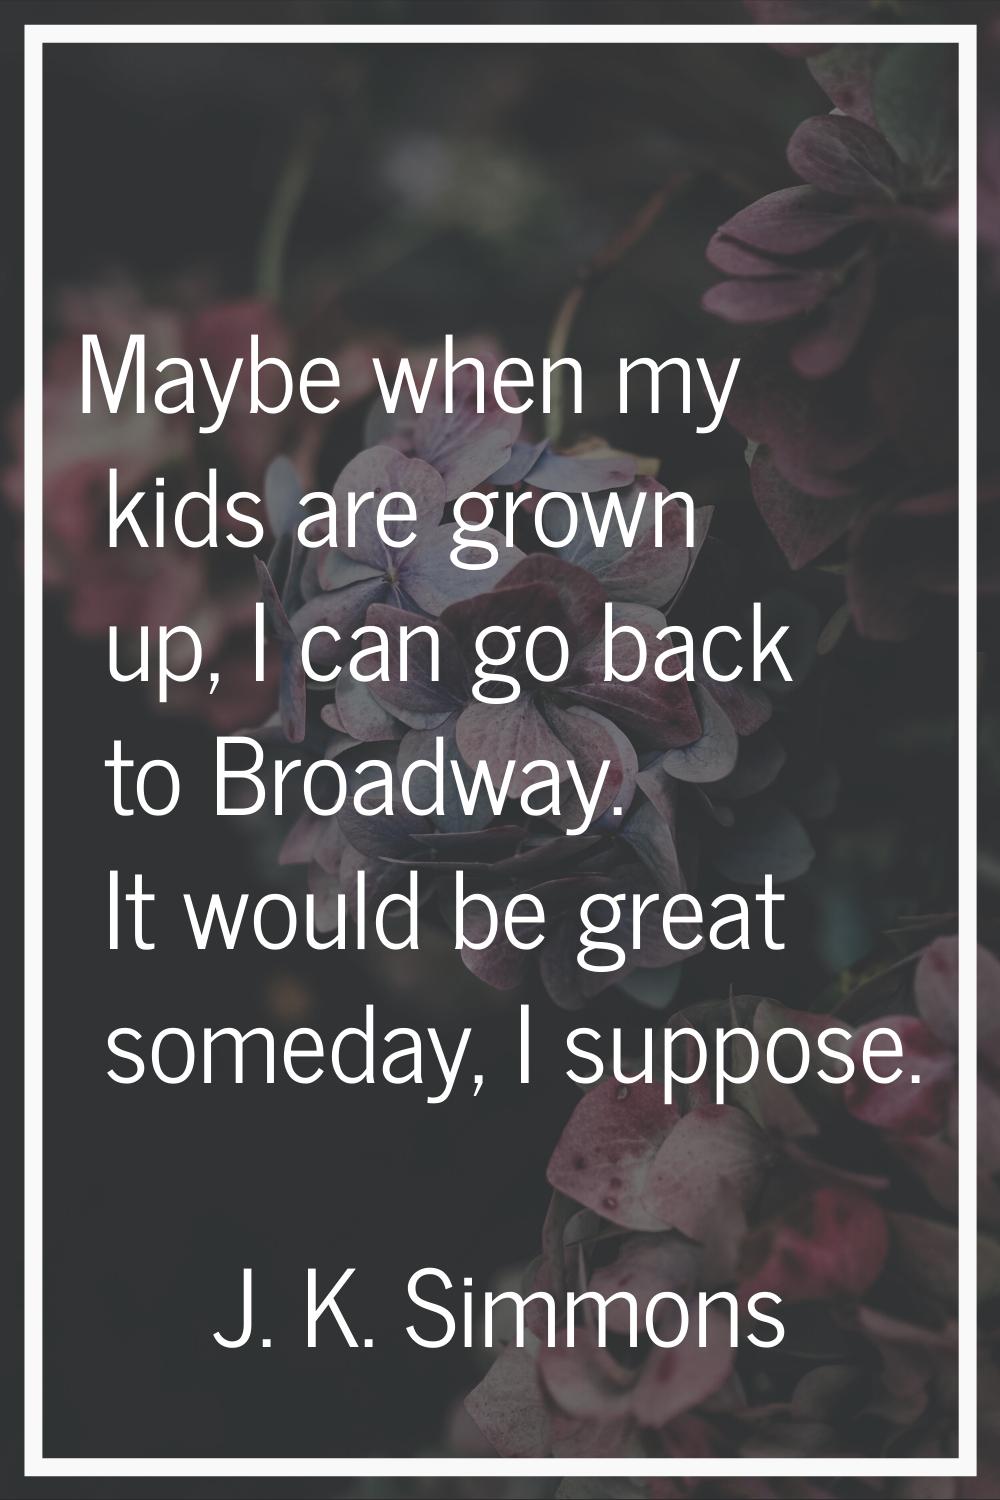 Maybe when my kids are grown up, I can go back to Broadway. It would be great someday, I suppose.